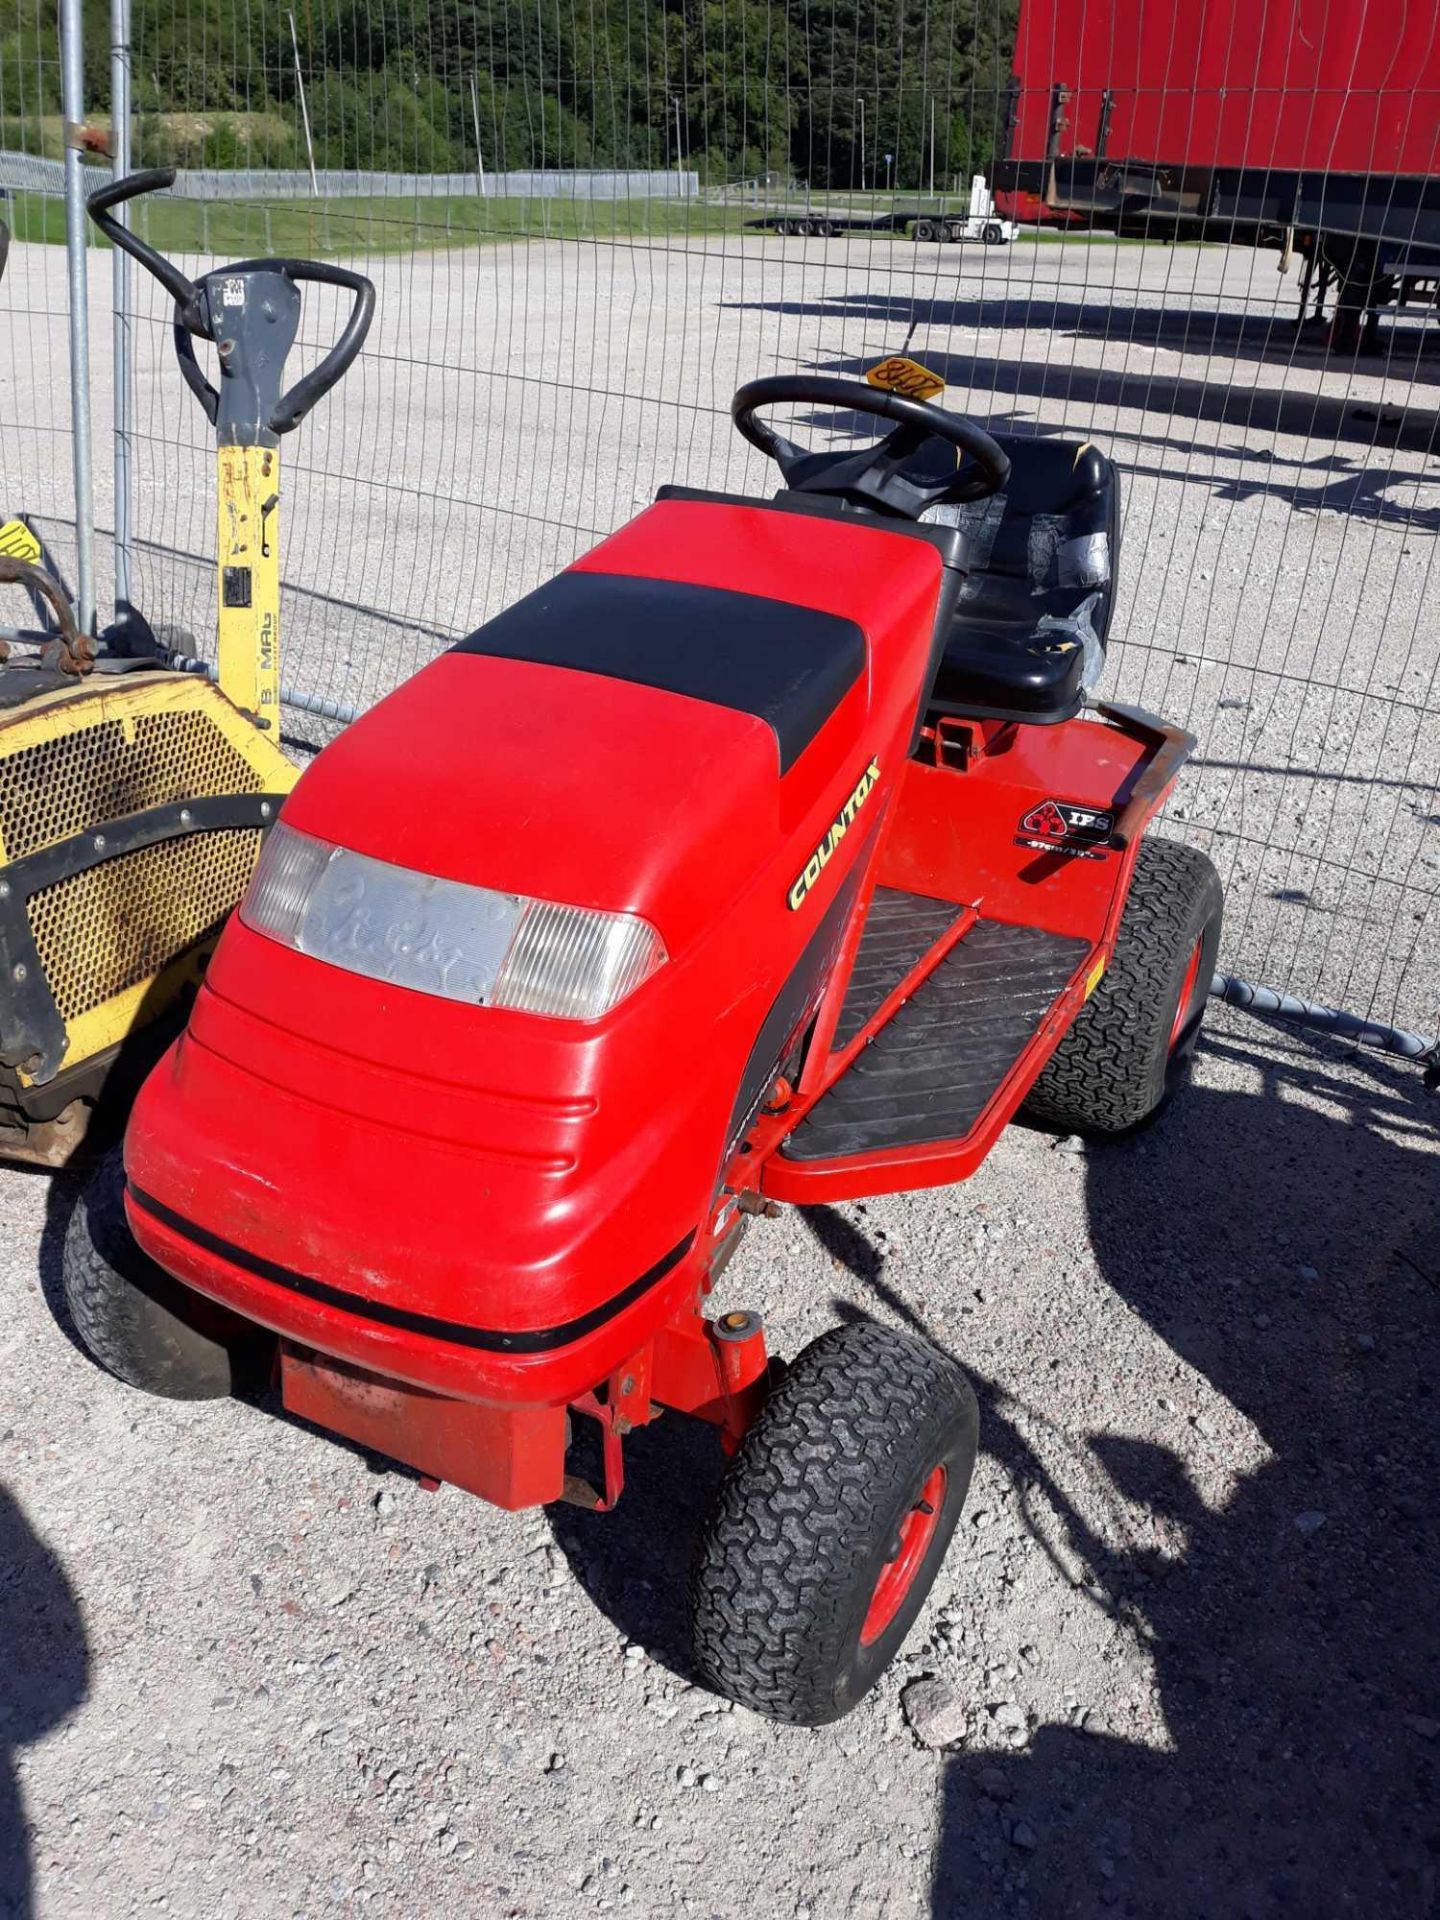 COUNTAX RIDE ON MOWER - NO DECK KEY IN PC